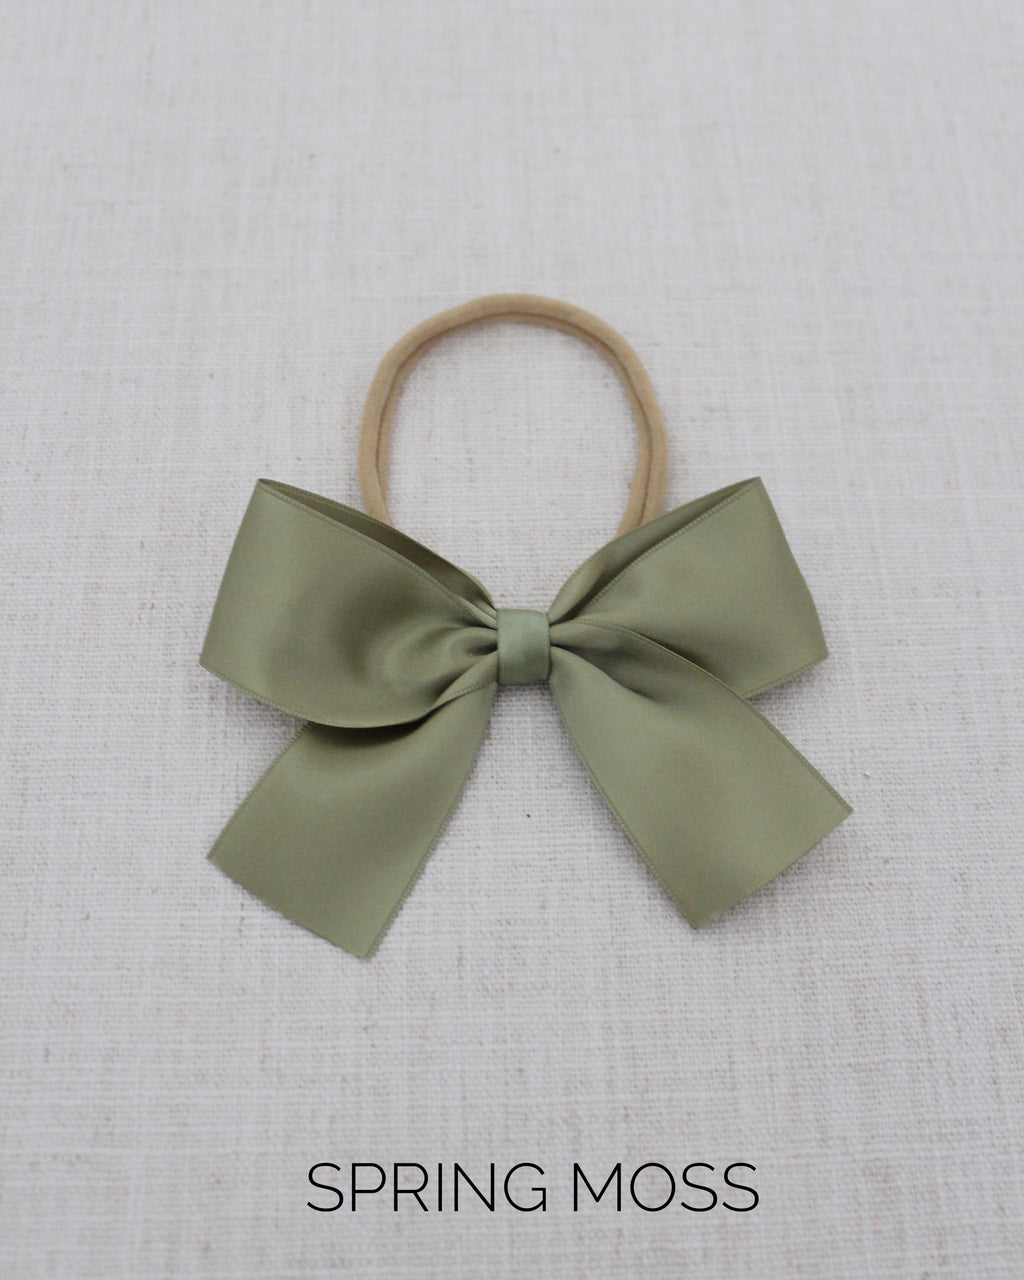 Satin Bows, Silk Bow, Red Satin Bow, Pink Bow, Mint Color Bow, Black Bow, Bow  Hair Clamp, Hair Clip, Big Red Bow for Hair 